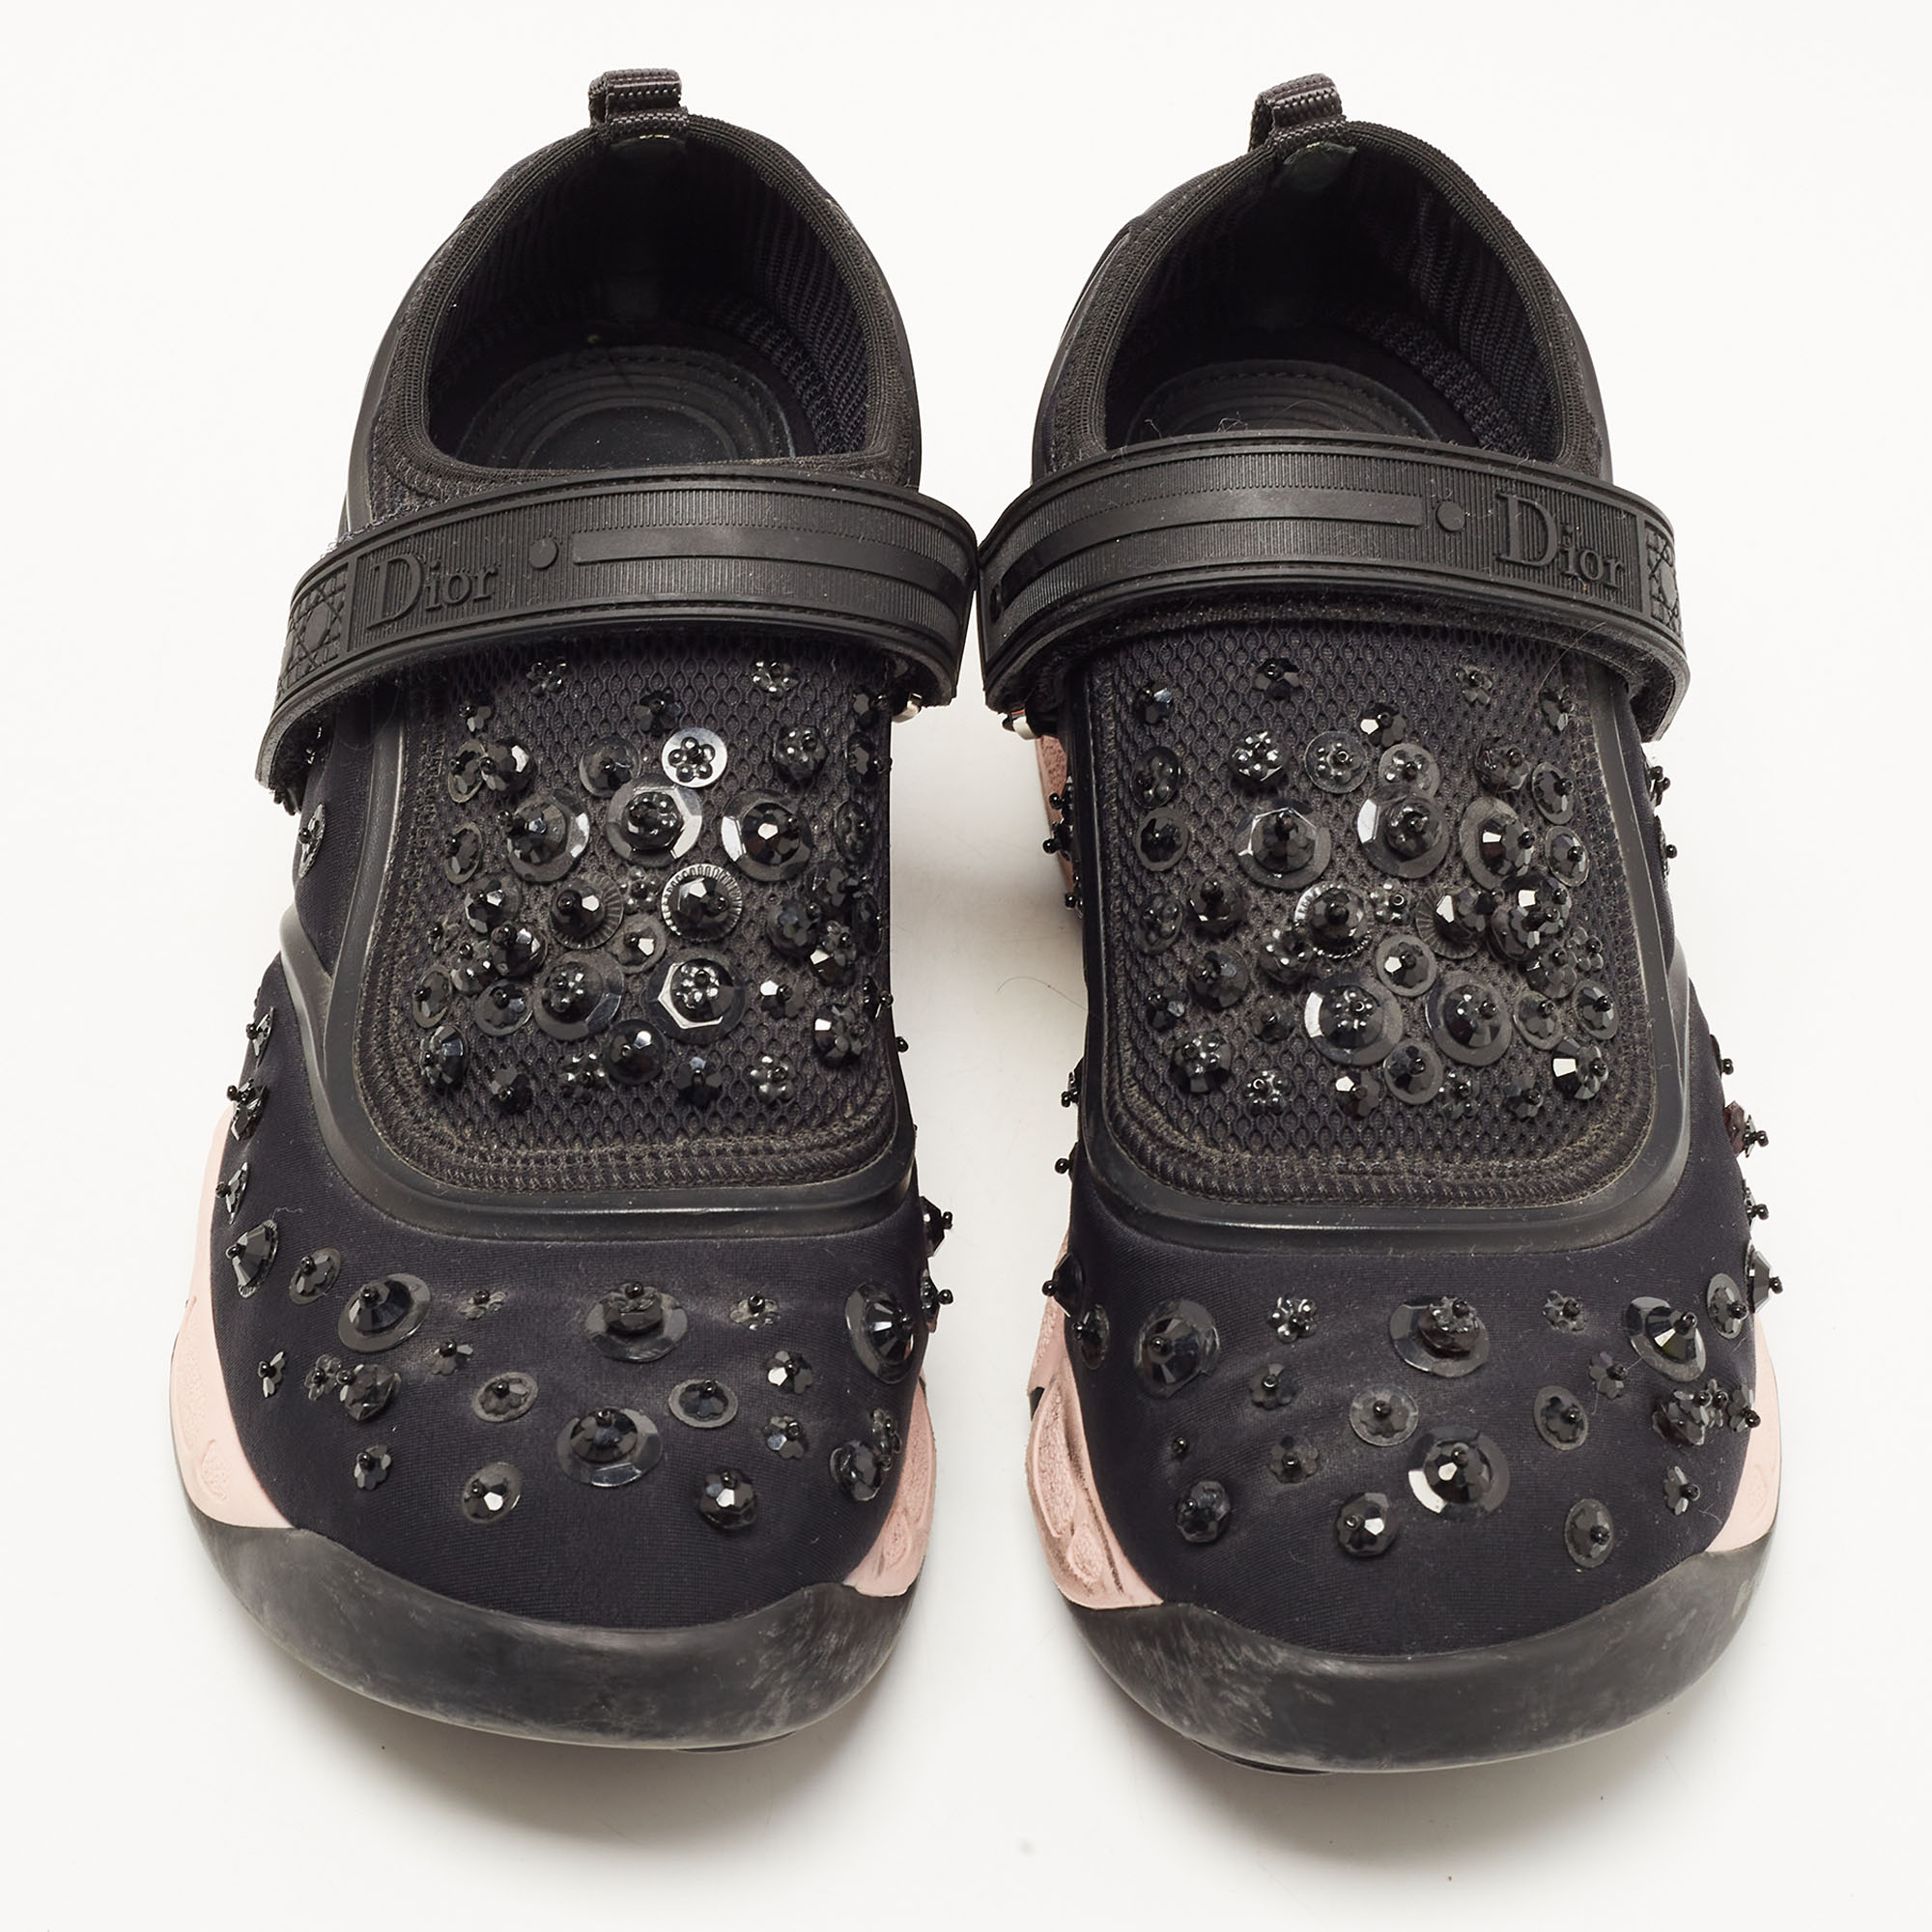 Dior Black Neoprene And Mesh Fusion Embellished Velcro Strap Sneakers Size 37.5